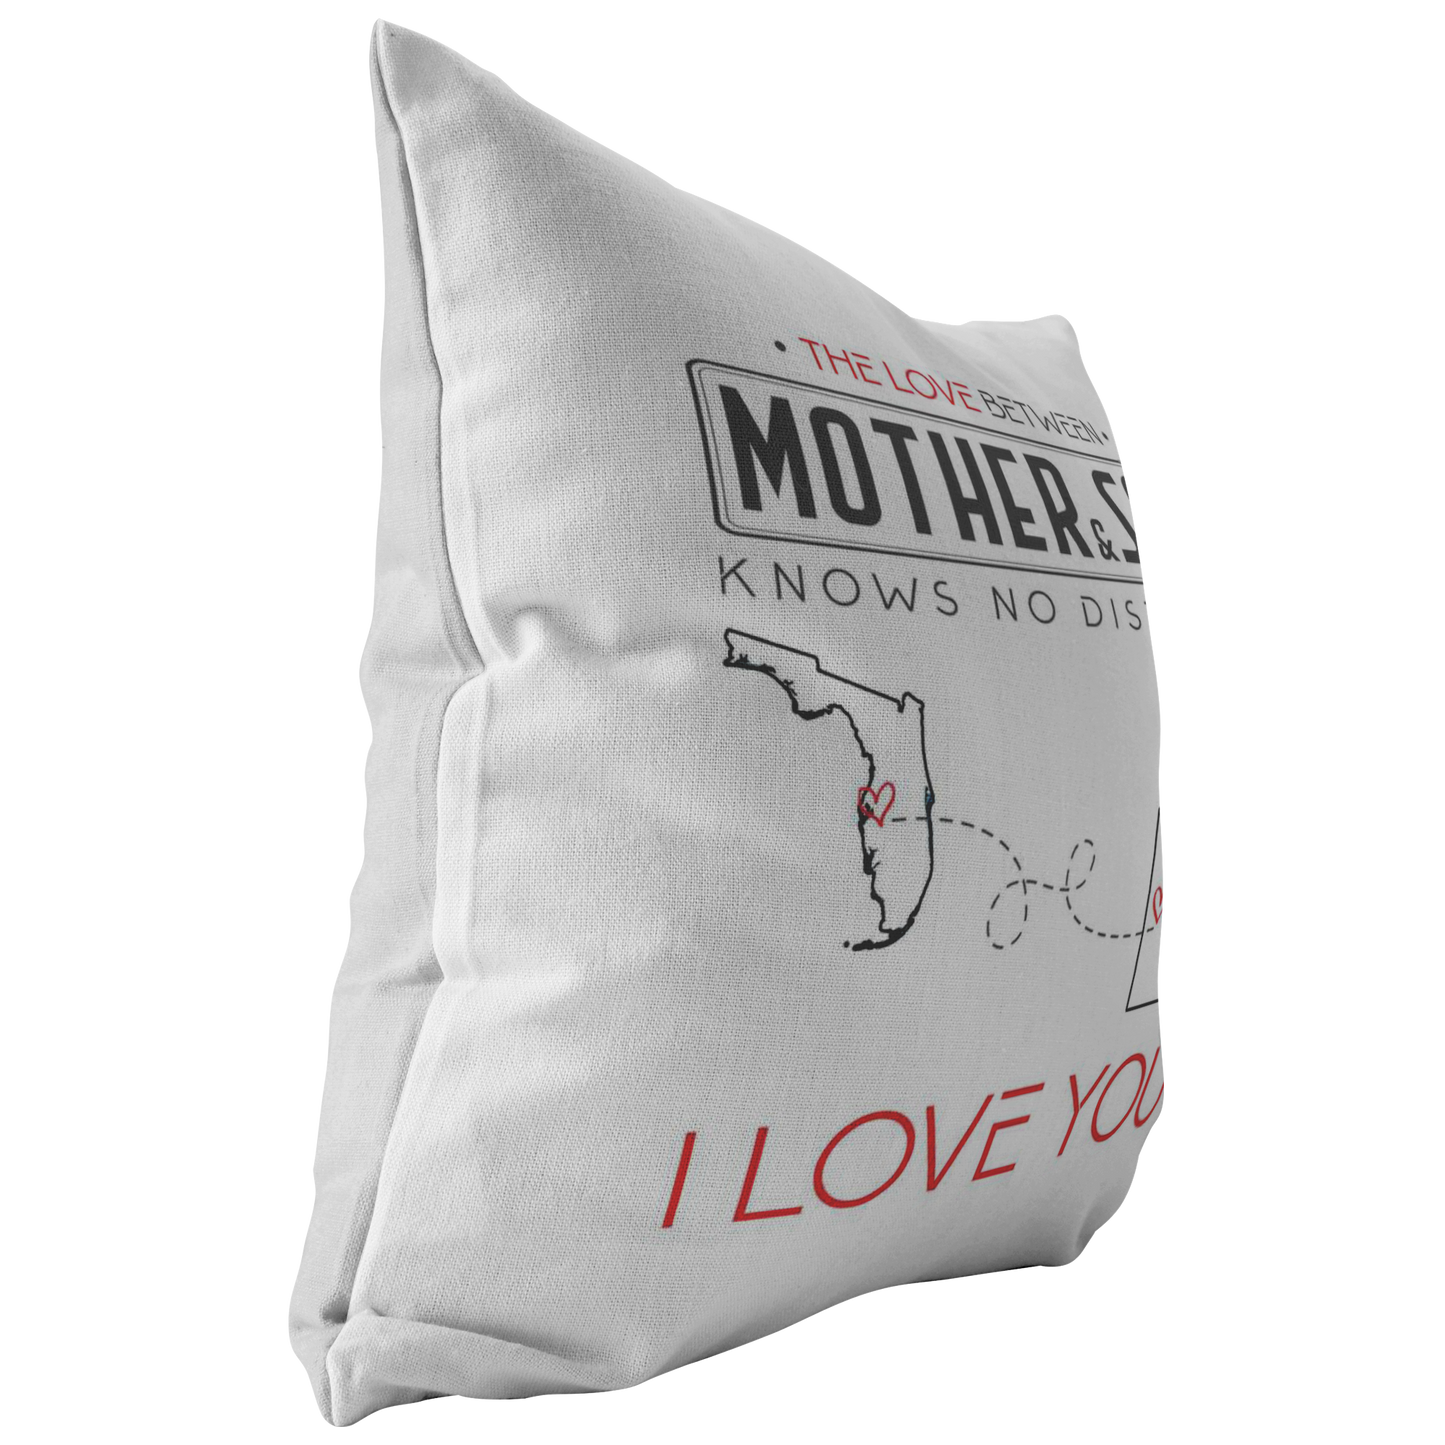 ND-pl20419737-sp-23639 - [ Florida | Utah | 1 ]Mothers Day Gifts From Son - The Love Between Mother  Son